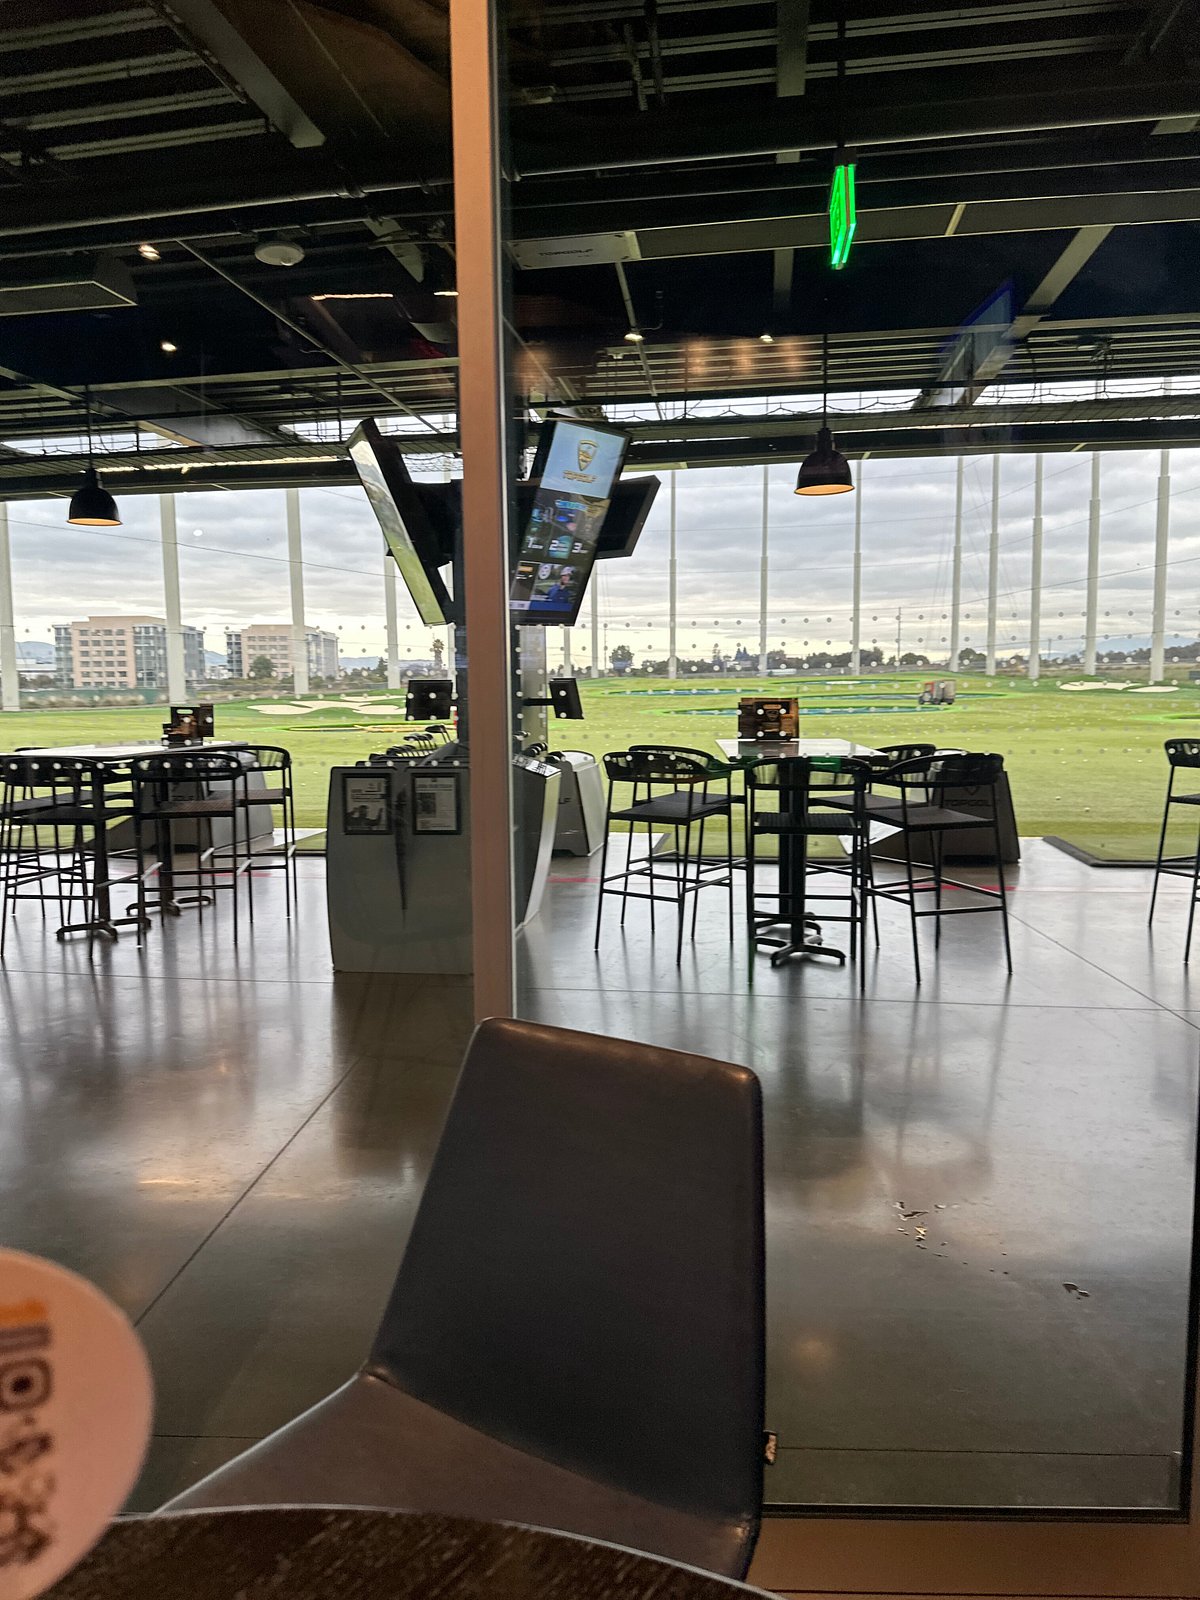 Top Golf complex in north San Jose edges closer to opening